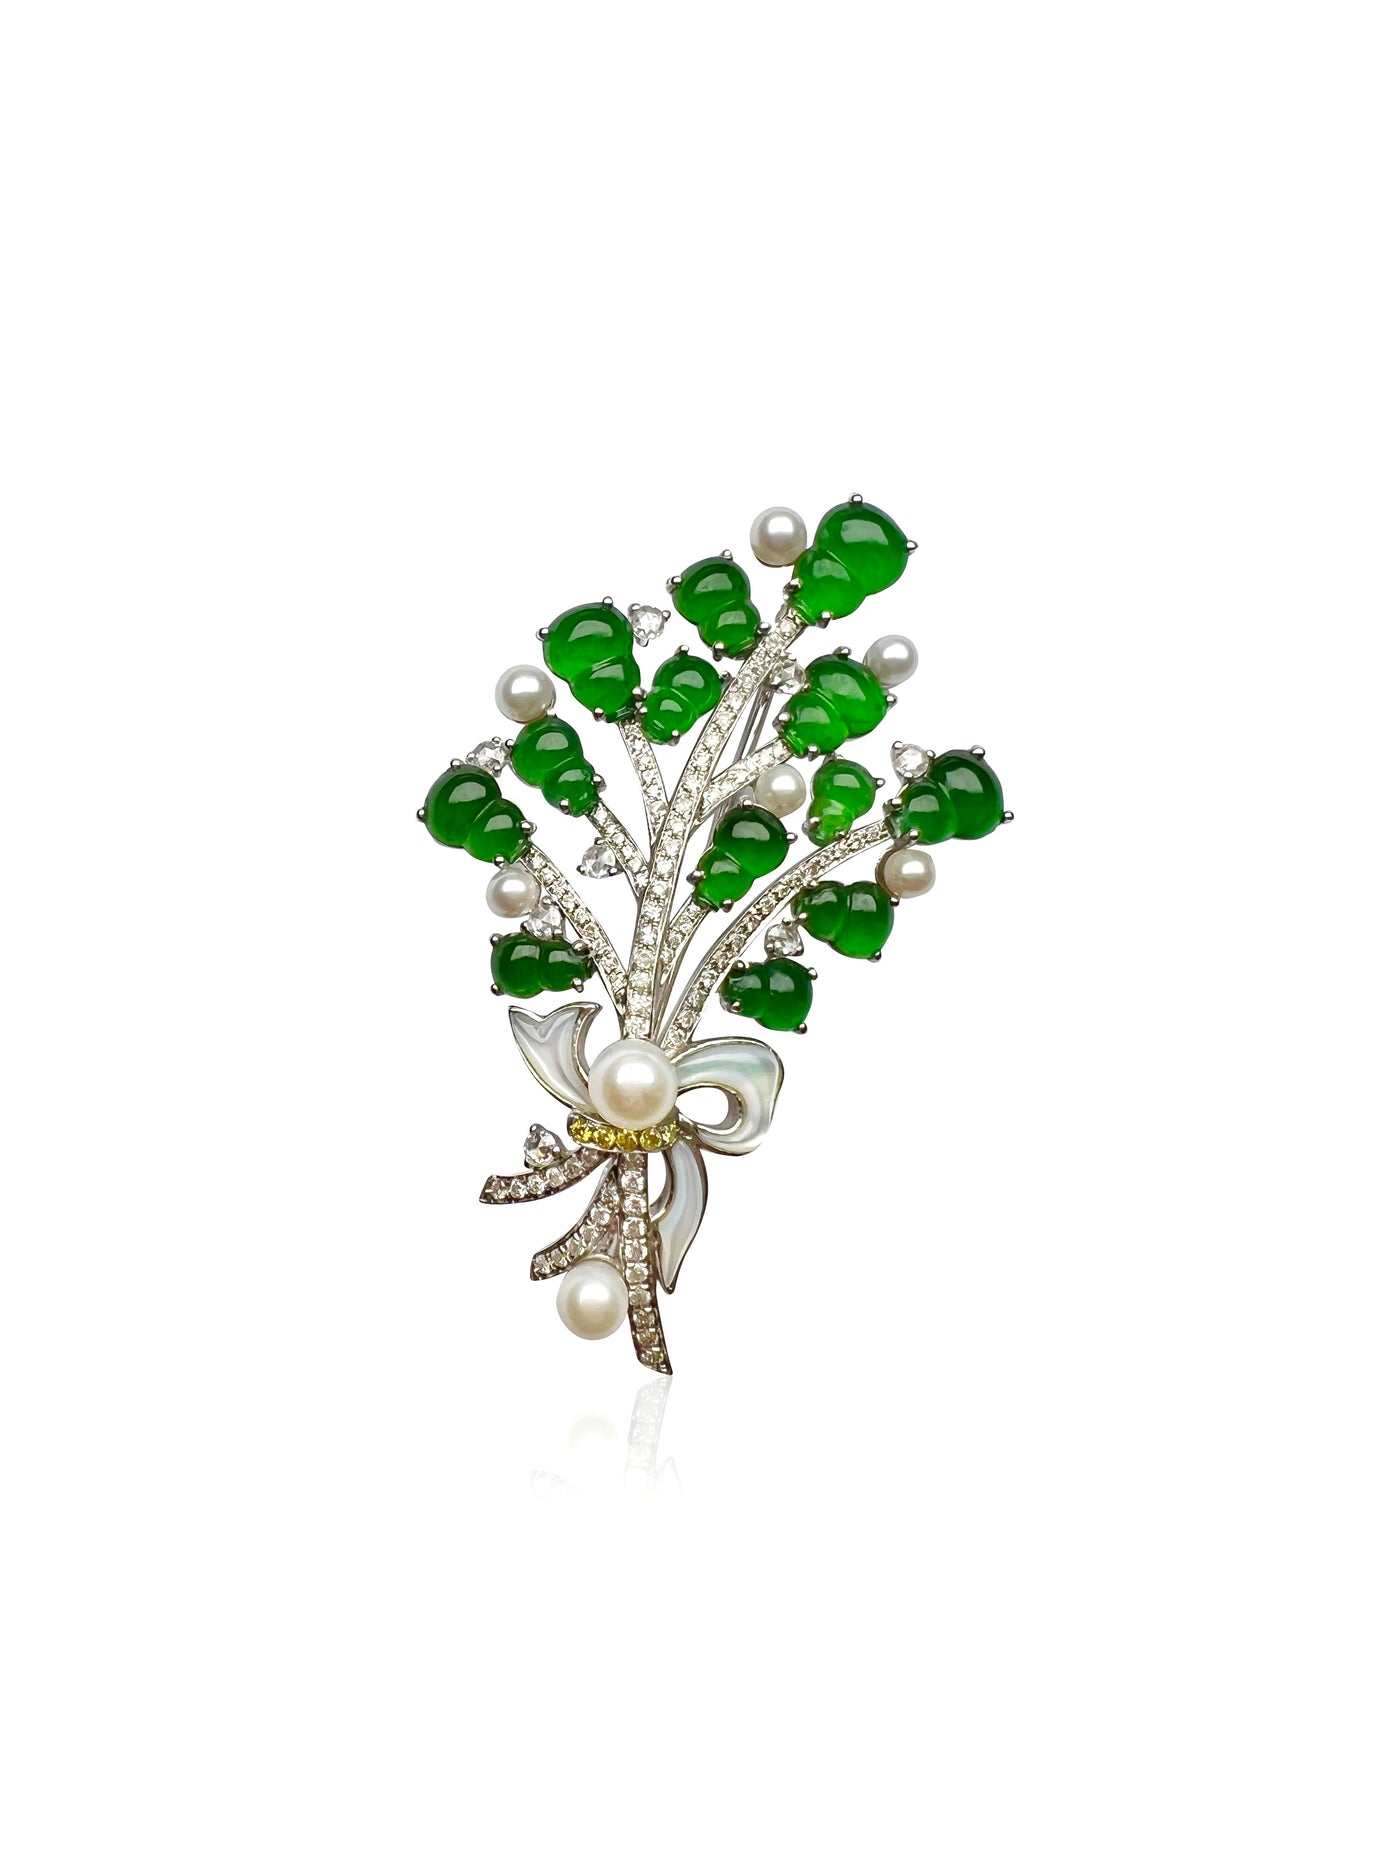 Petite bouquet jadeite brooch in 18K white gold with diamonds and mother of pearl